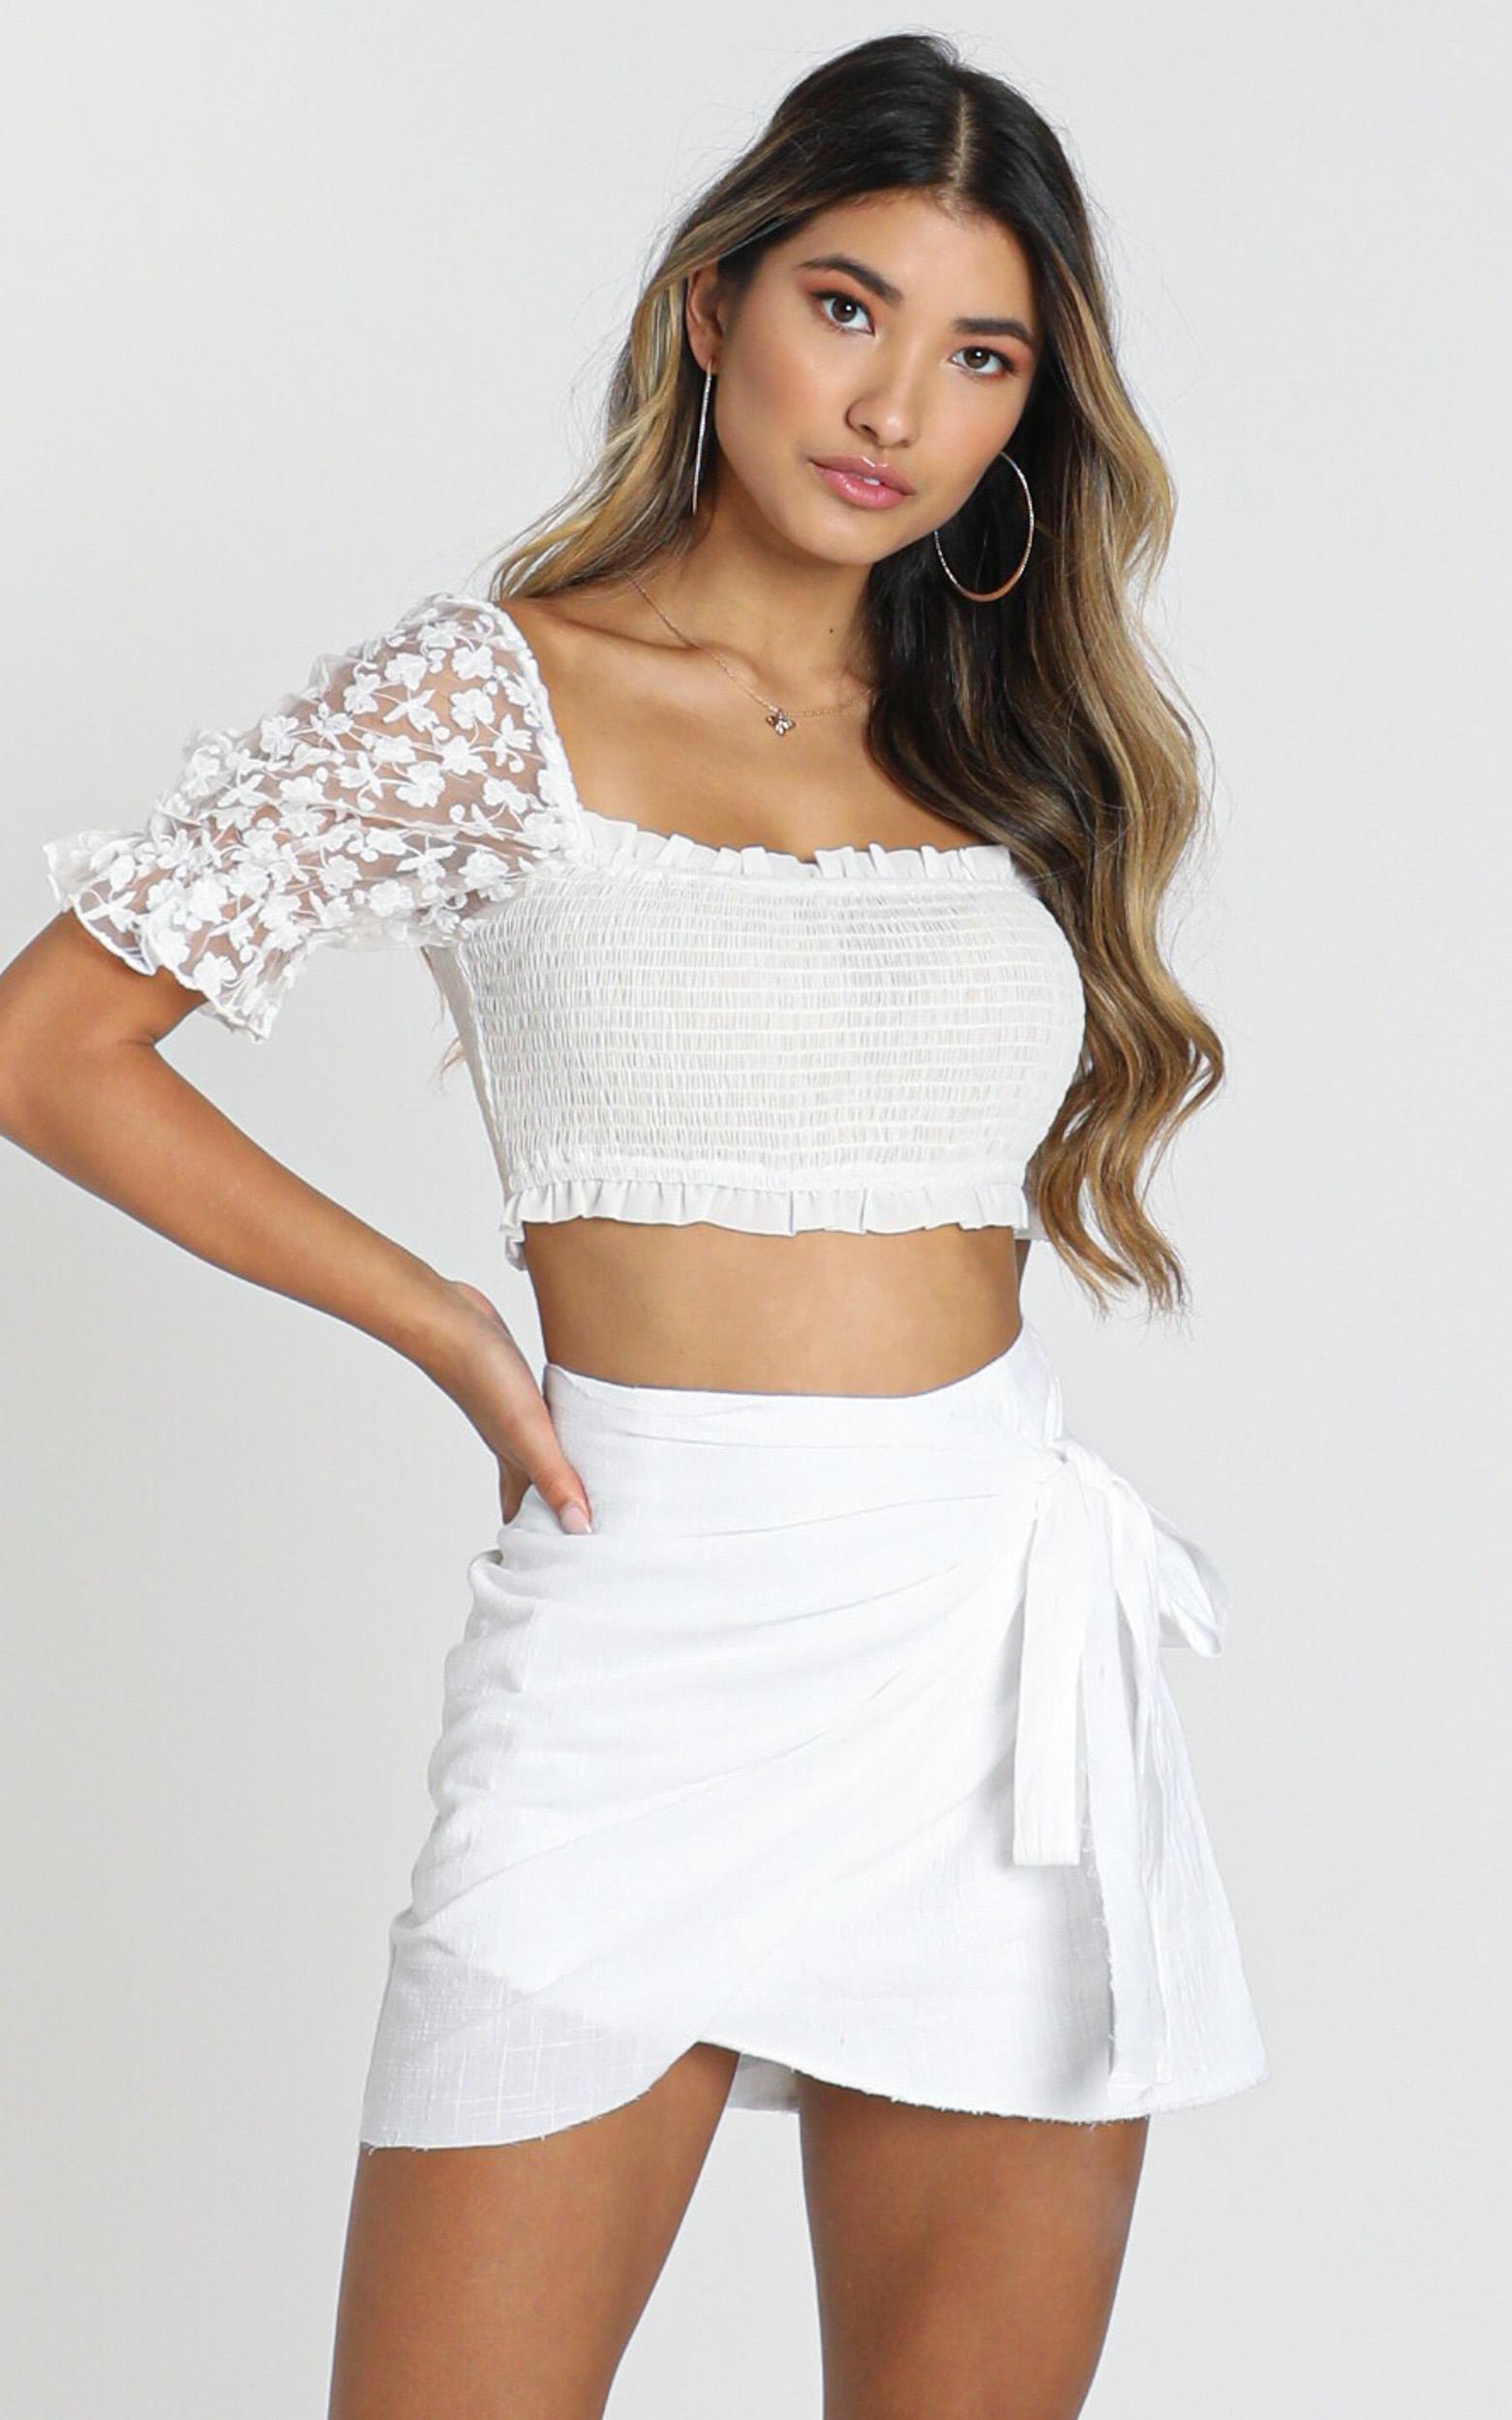 Not Happening skirt in white - 6 (XS), White, hi-res image number null